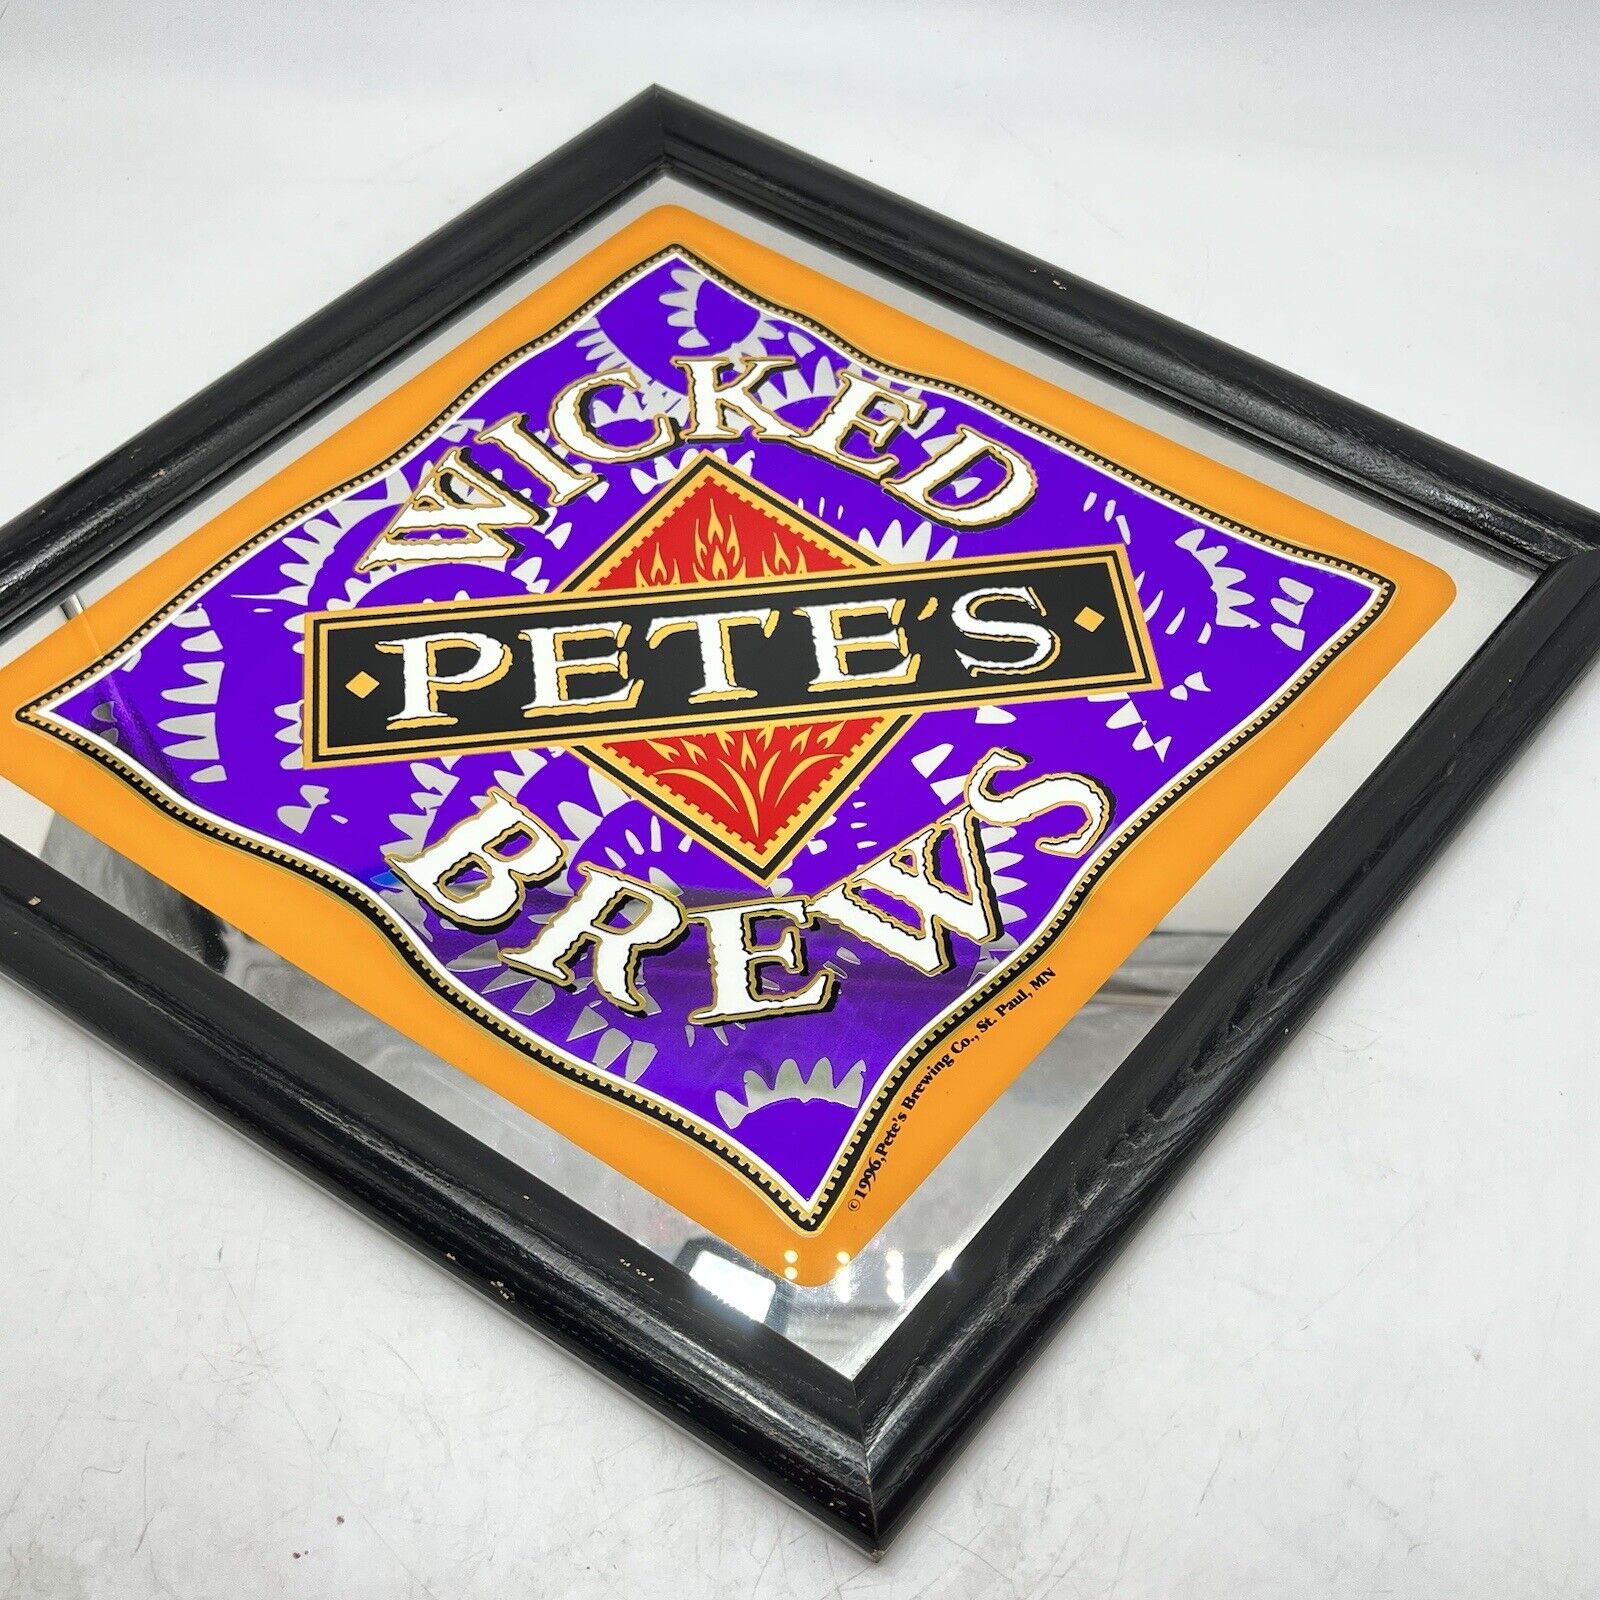 1996 Pete\'s Wicked Brews Bar Brewery Mirror Sign Wall Hanging